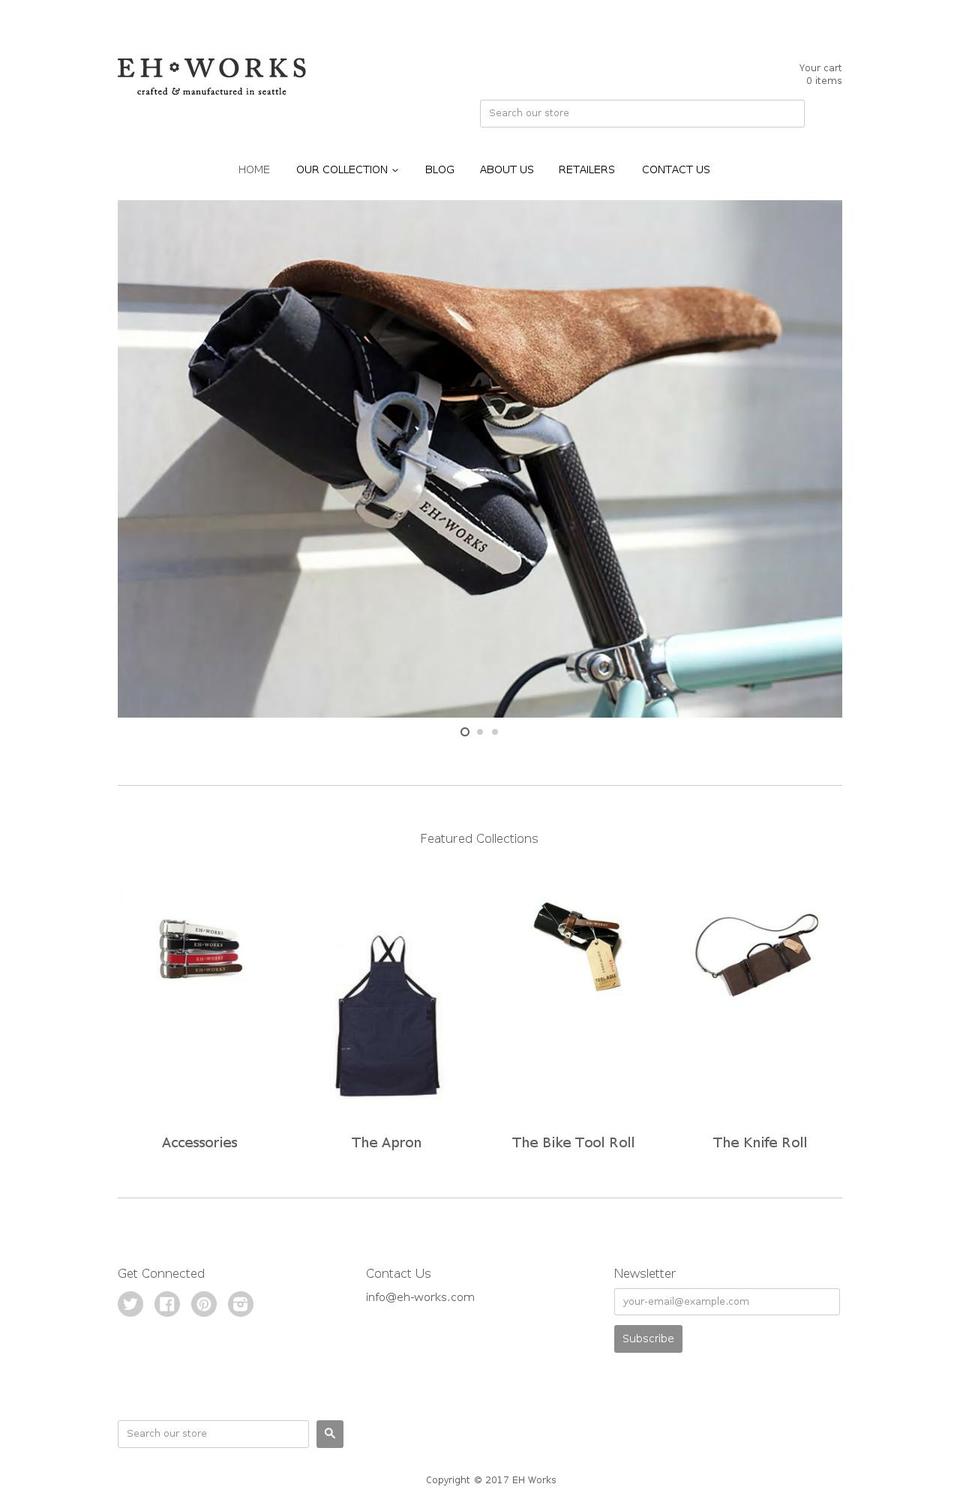 React Shopify theme site example eh-works.com